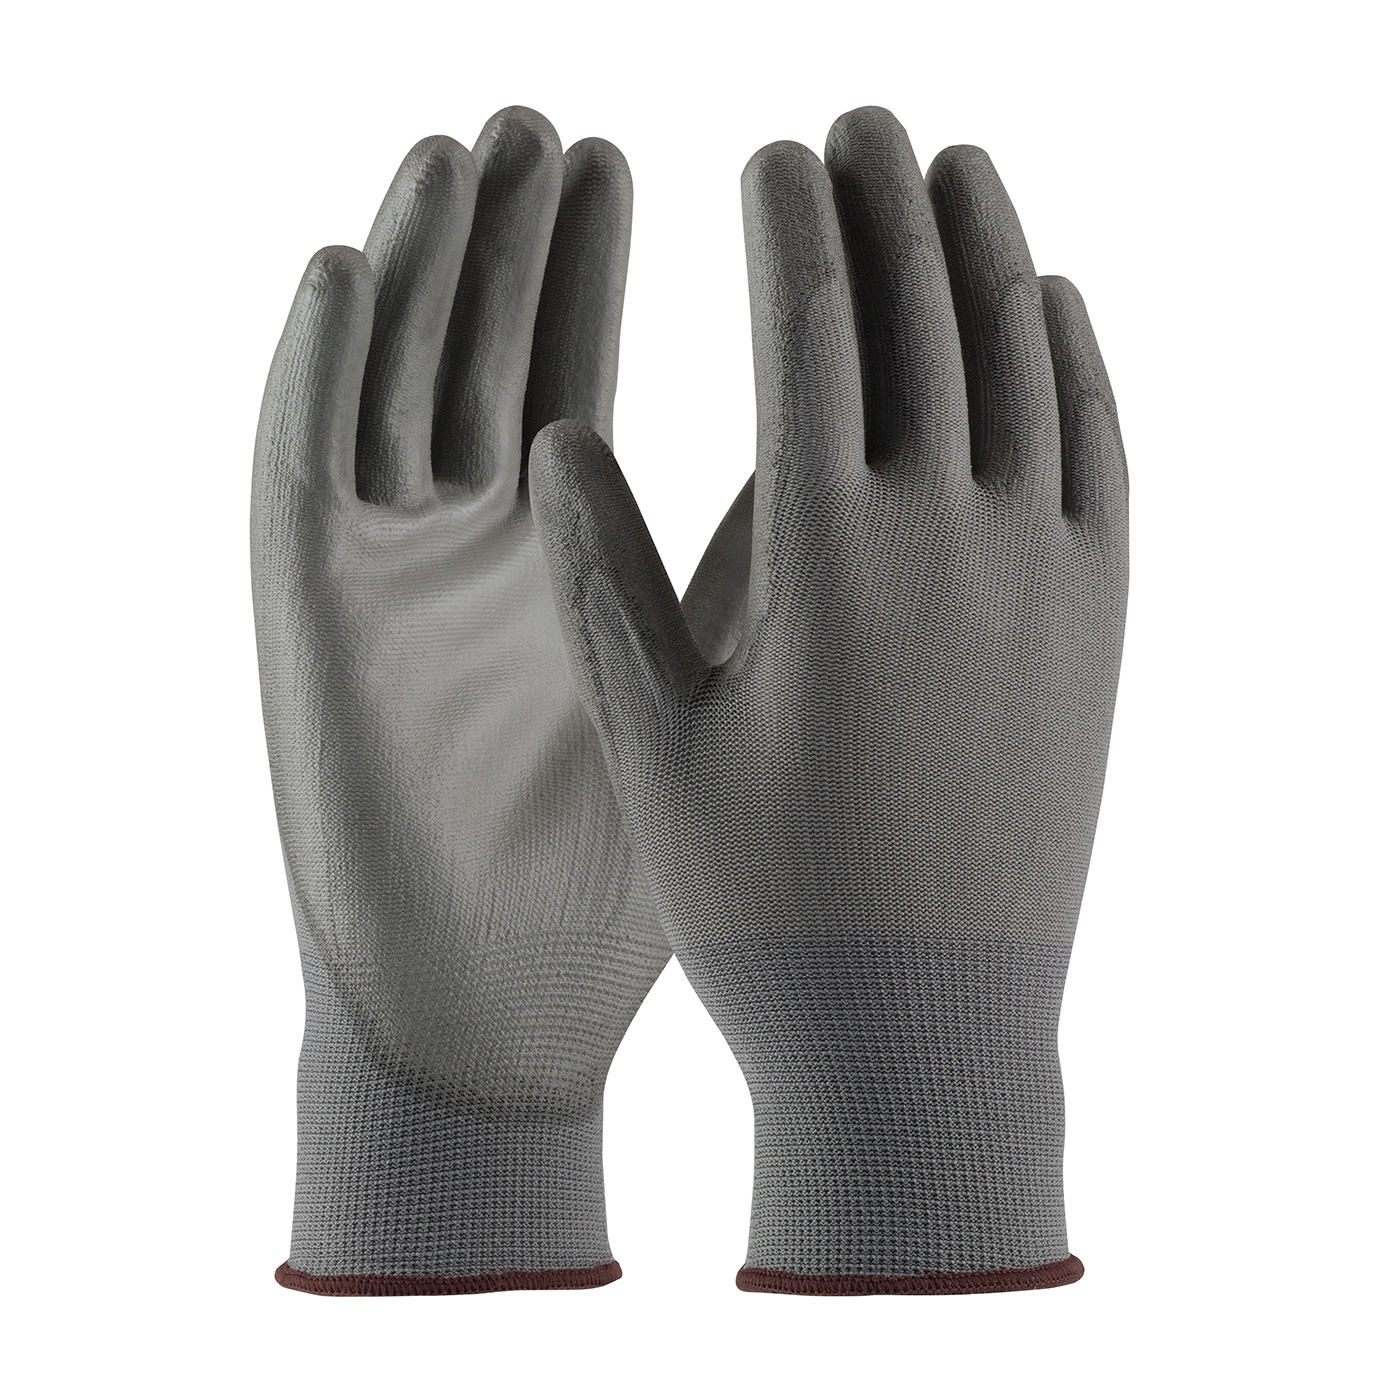 PIP® Seamless Knit Gray Polyester Glove with Gray Polyurethane Coated Smooth Grip on Palm & Fingers #33-G115